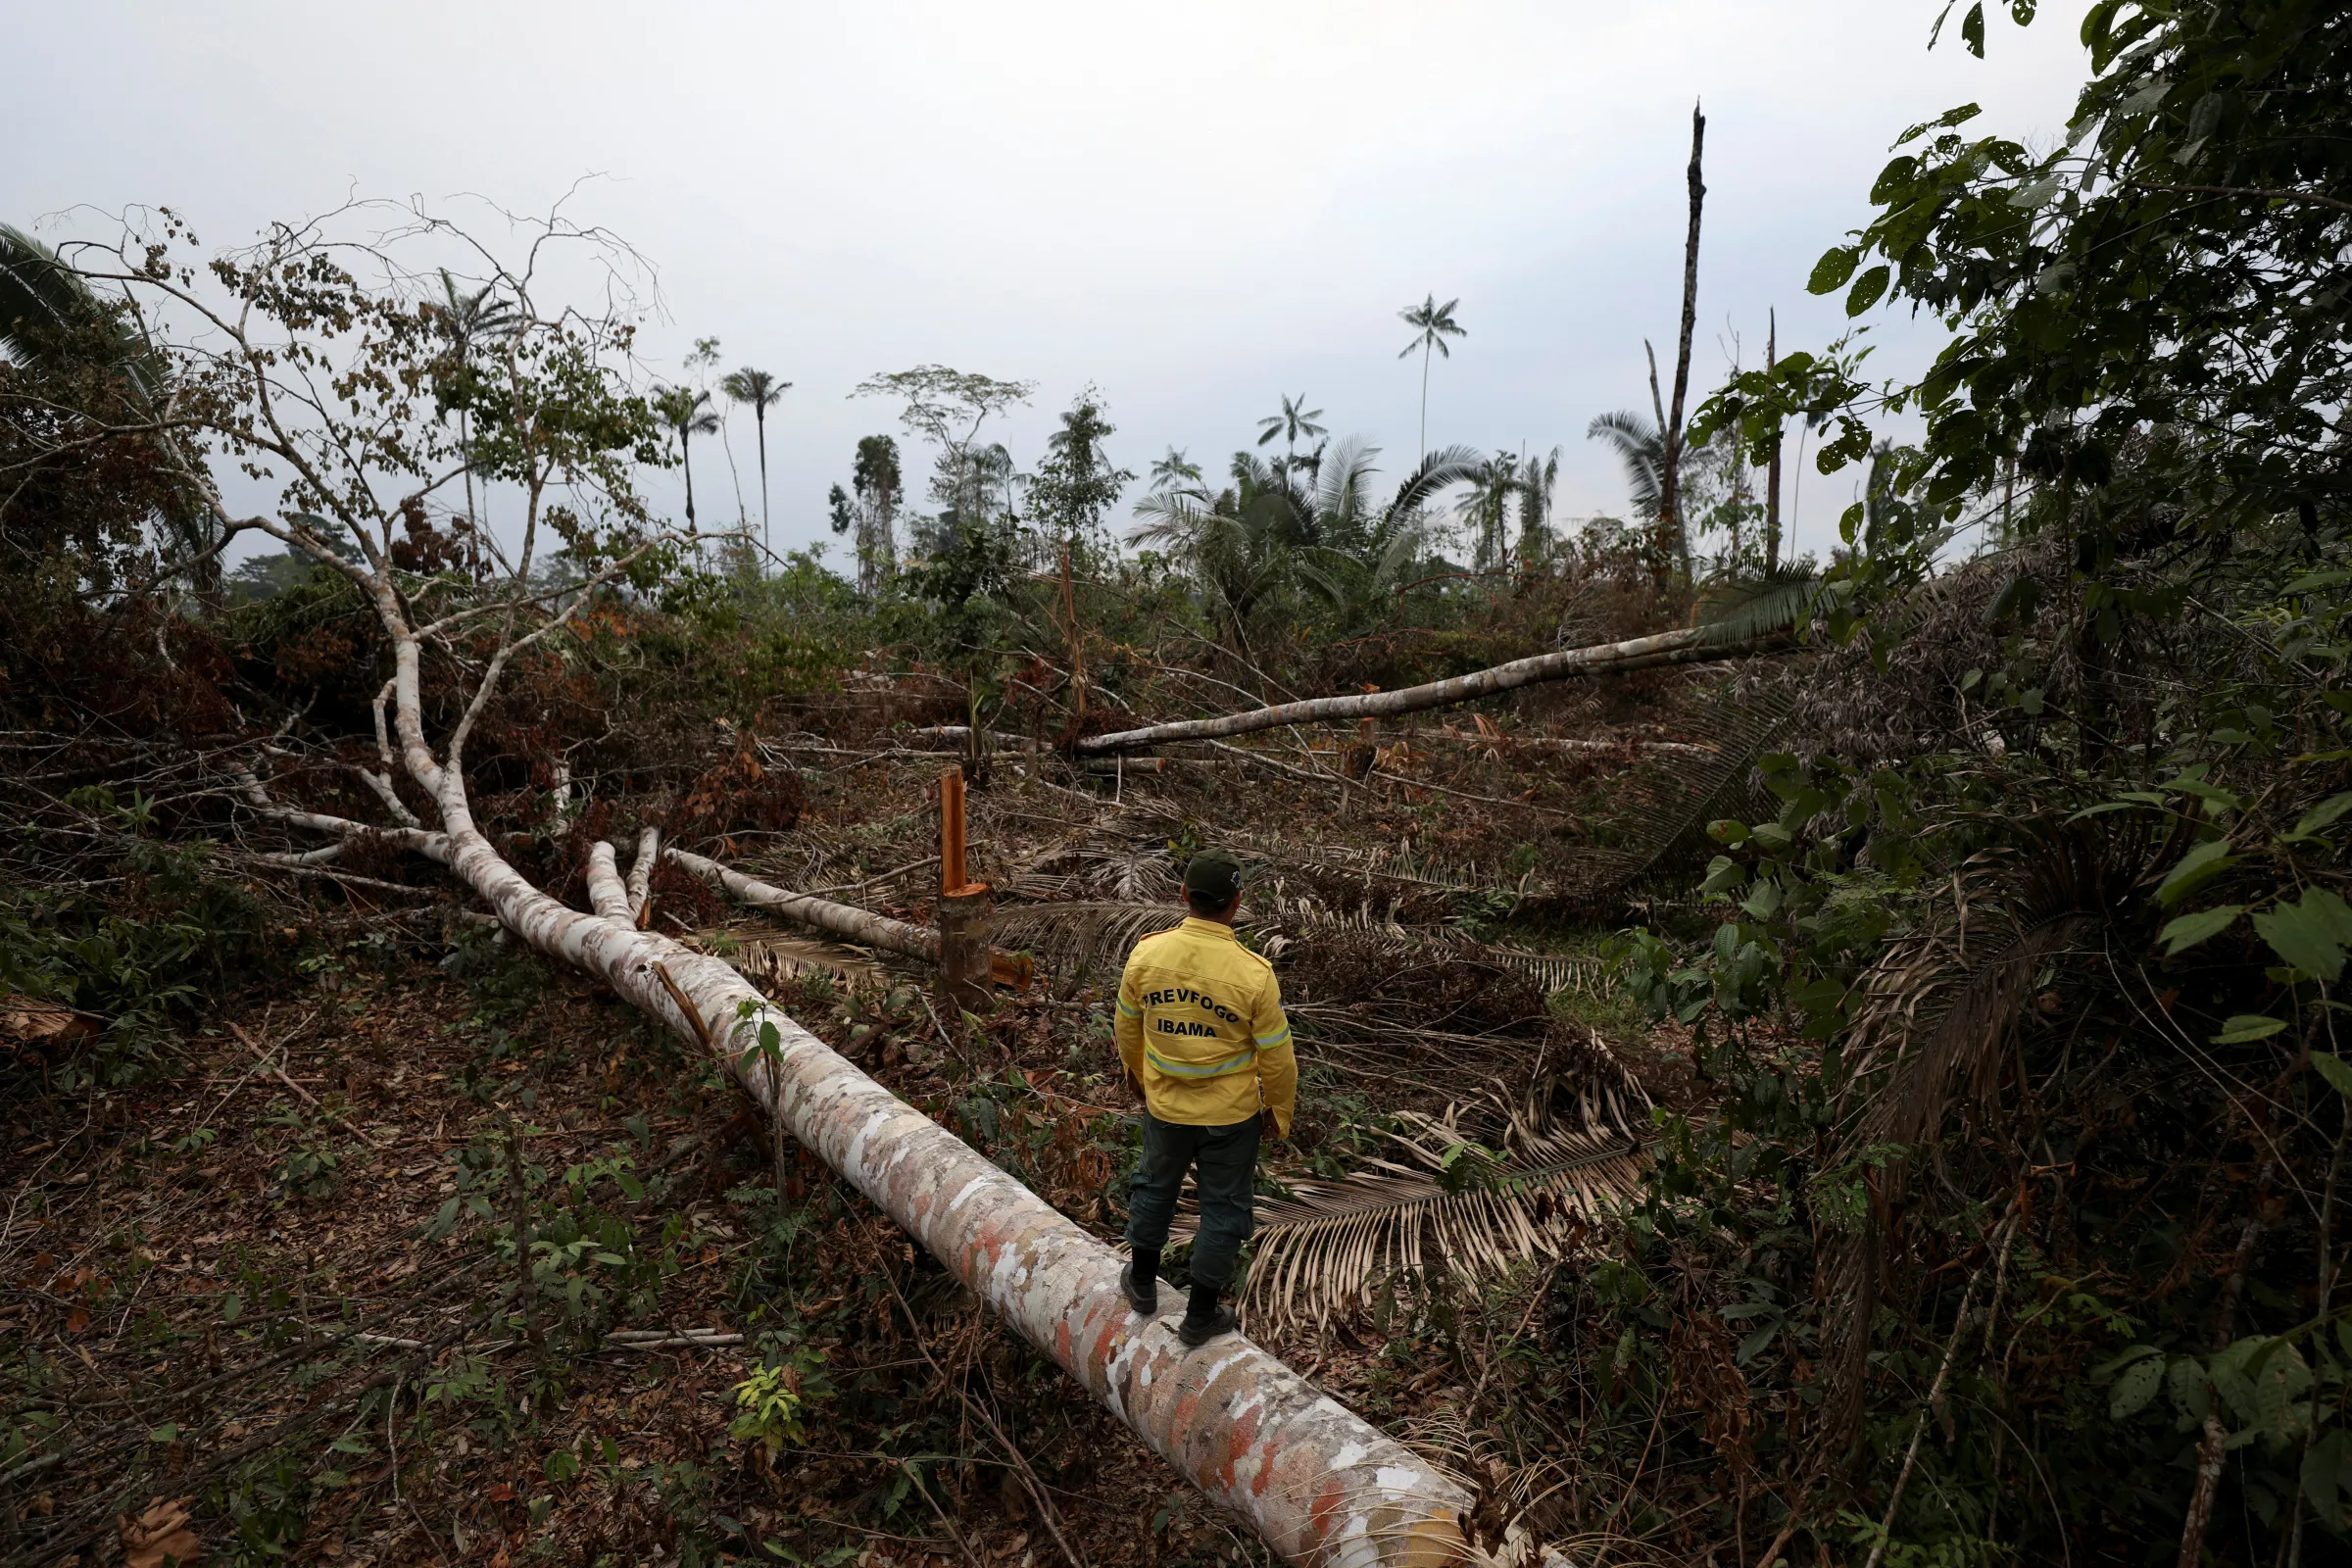 A man stands on a fallen tree in the middle of a deforested plot